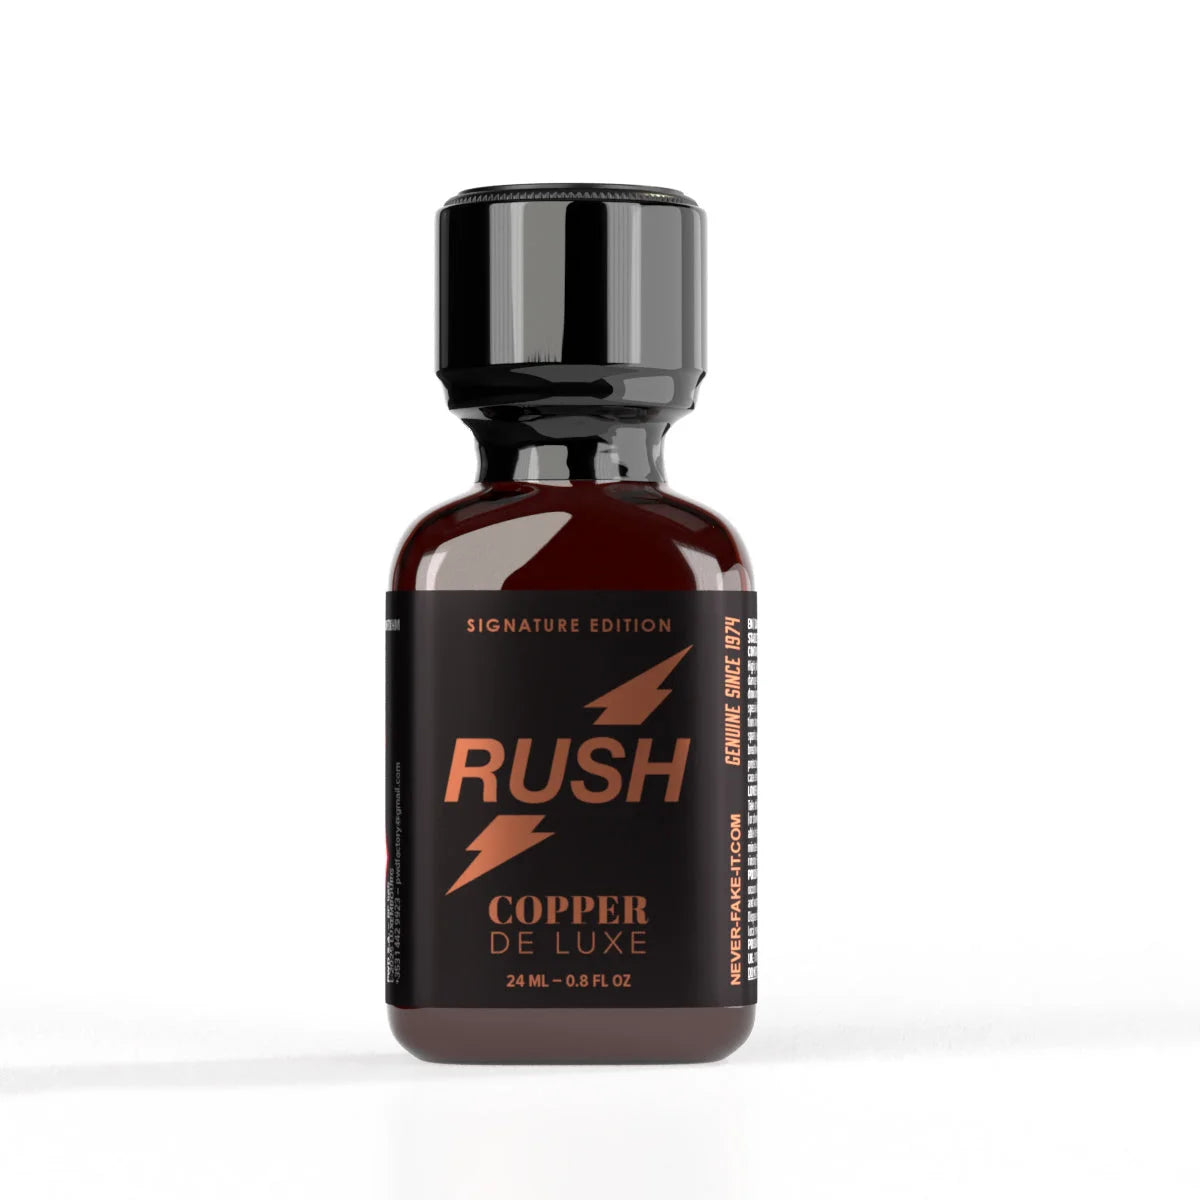 A product photo of a bottle of Rush Copper Deluxe Poppers.